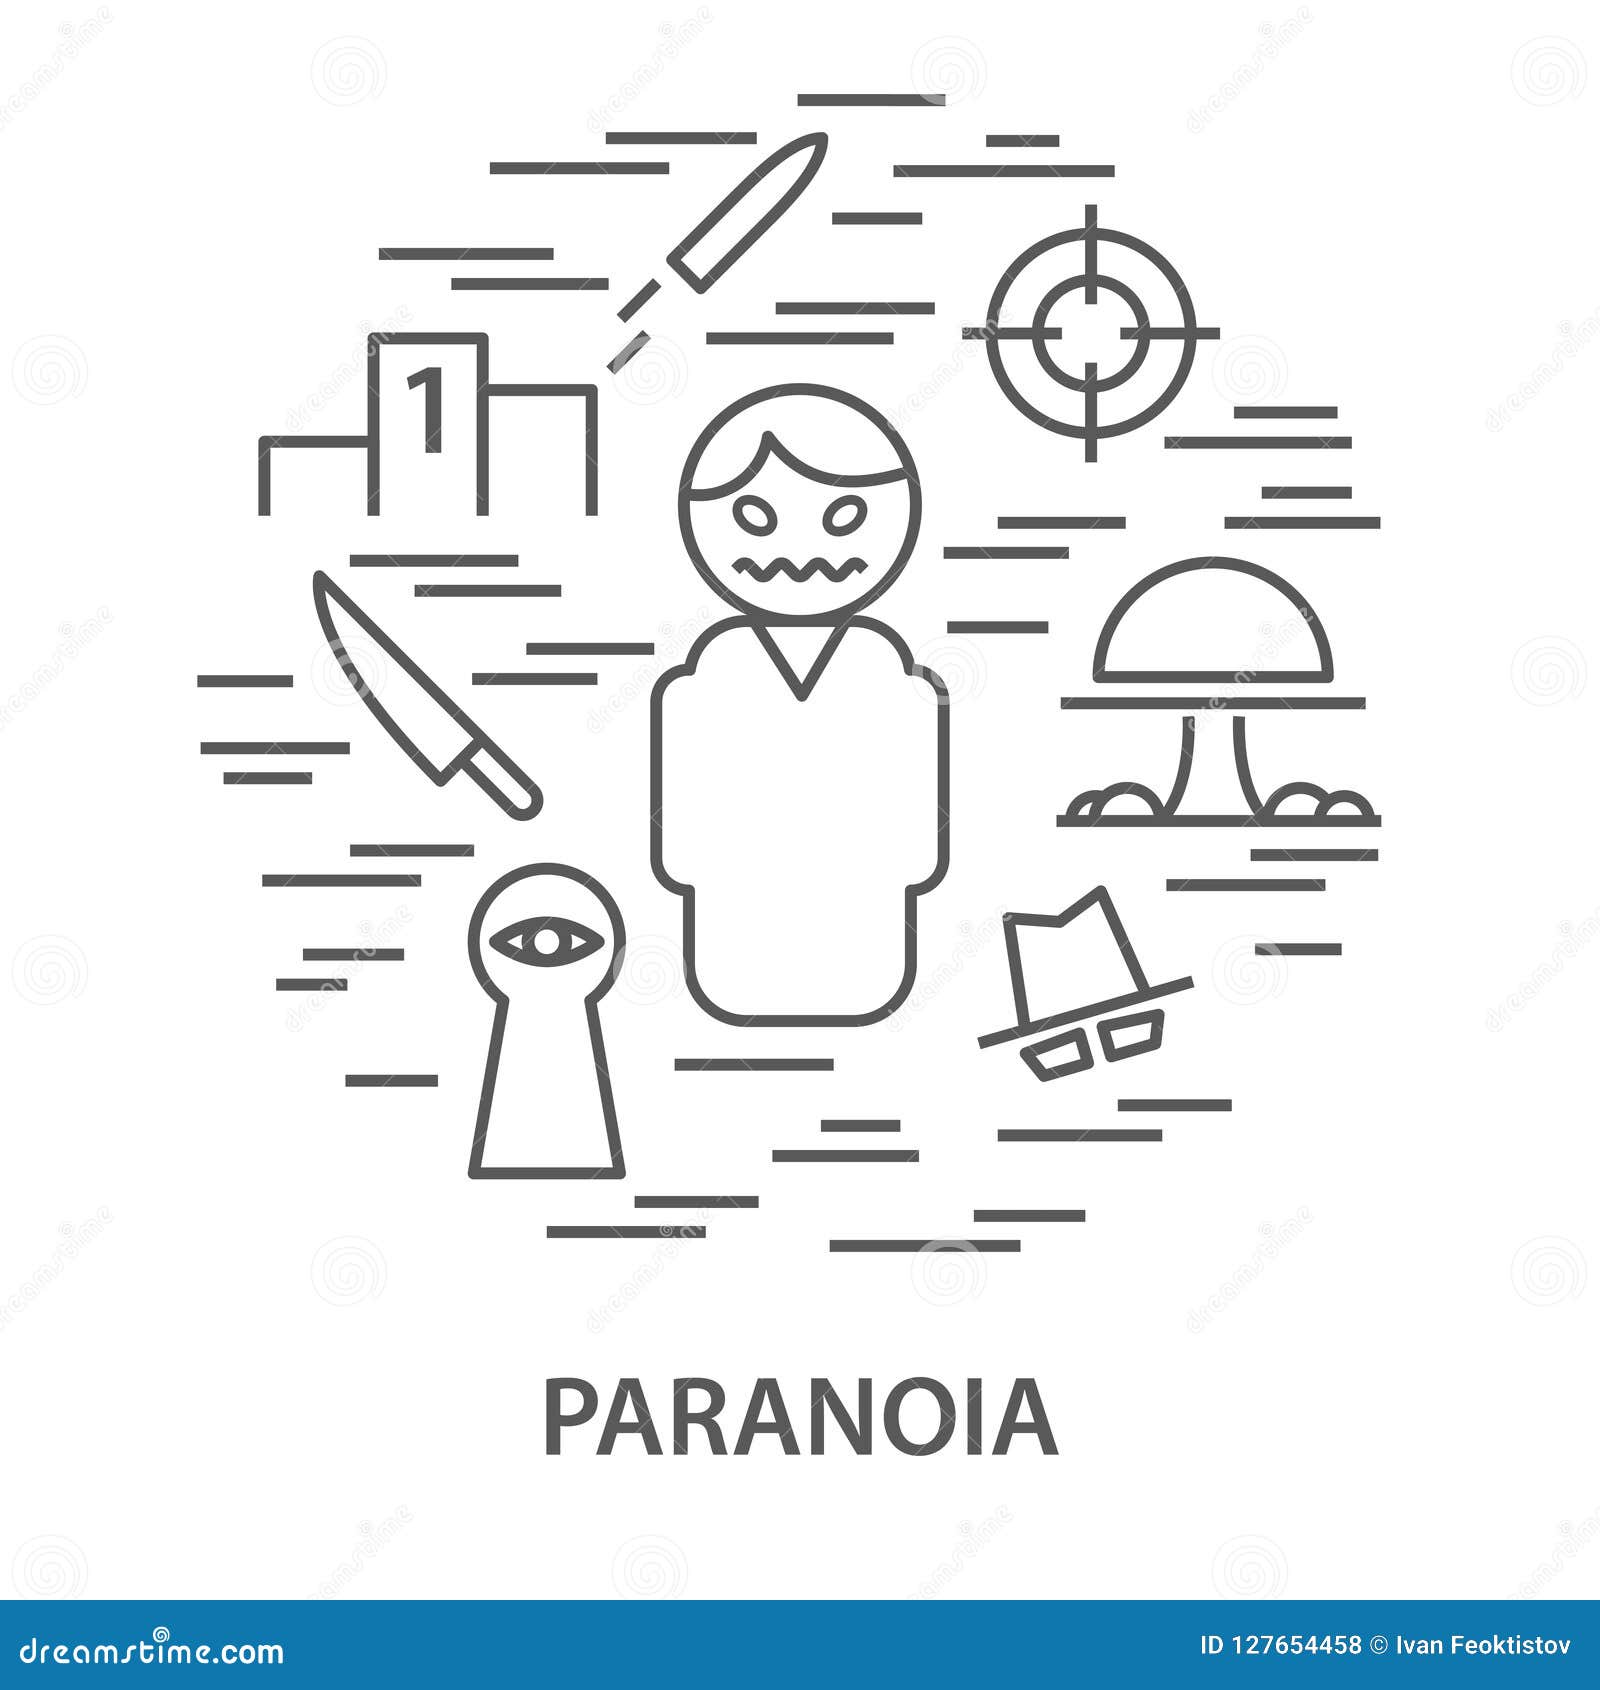 banners for paranoia